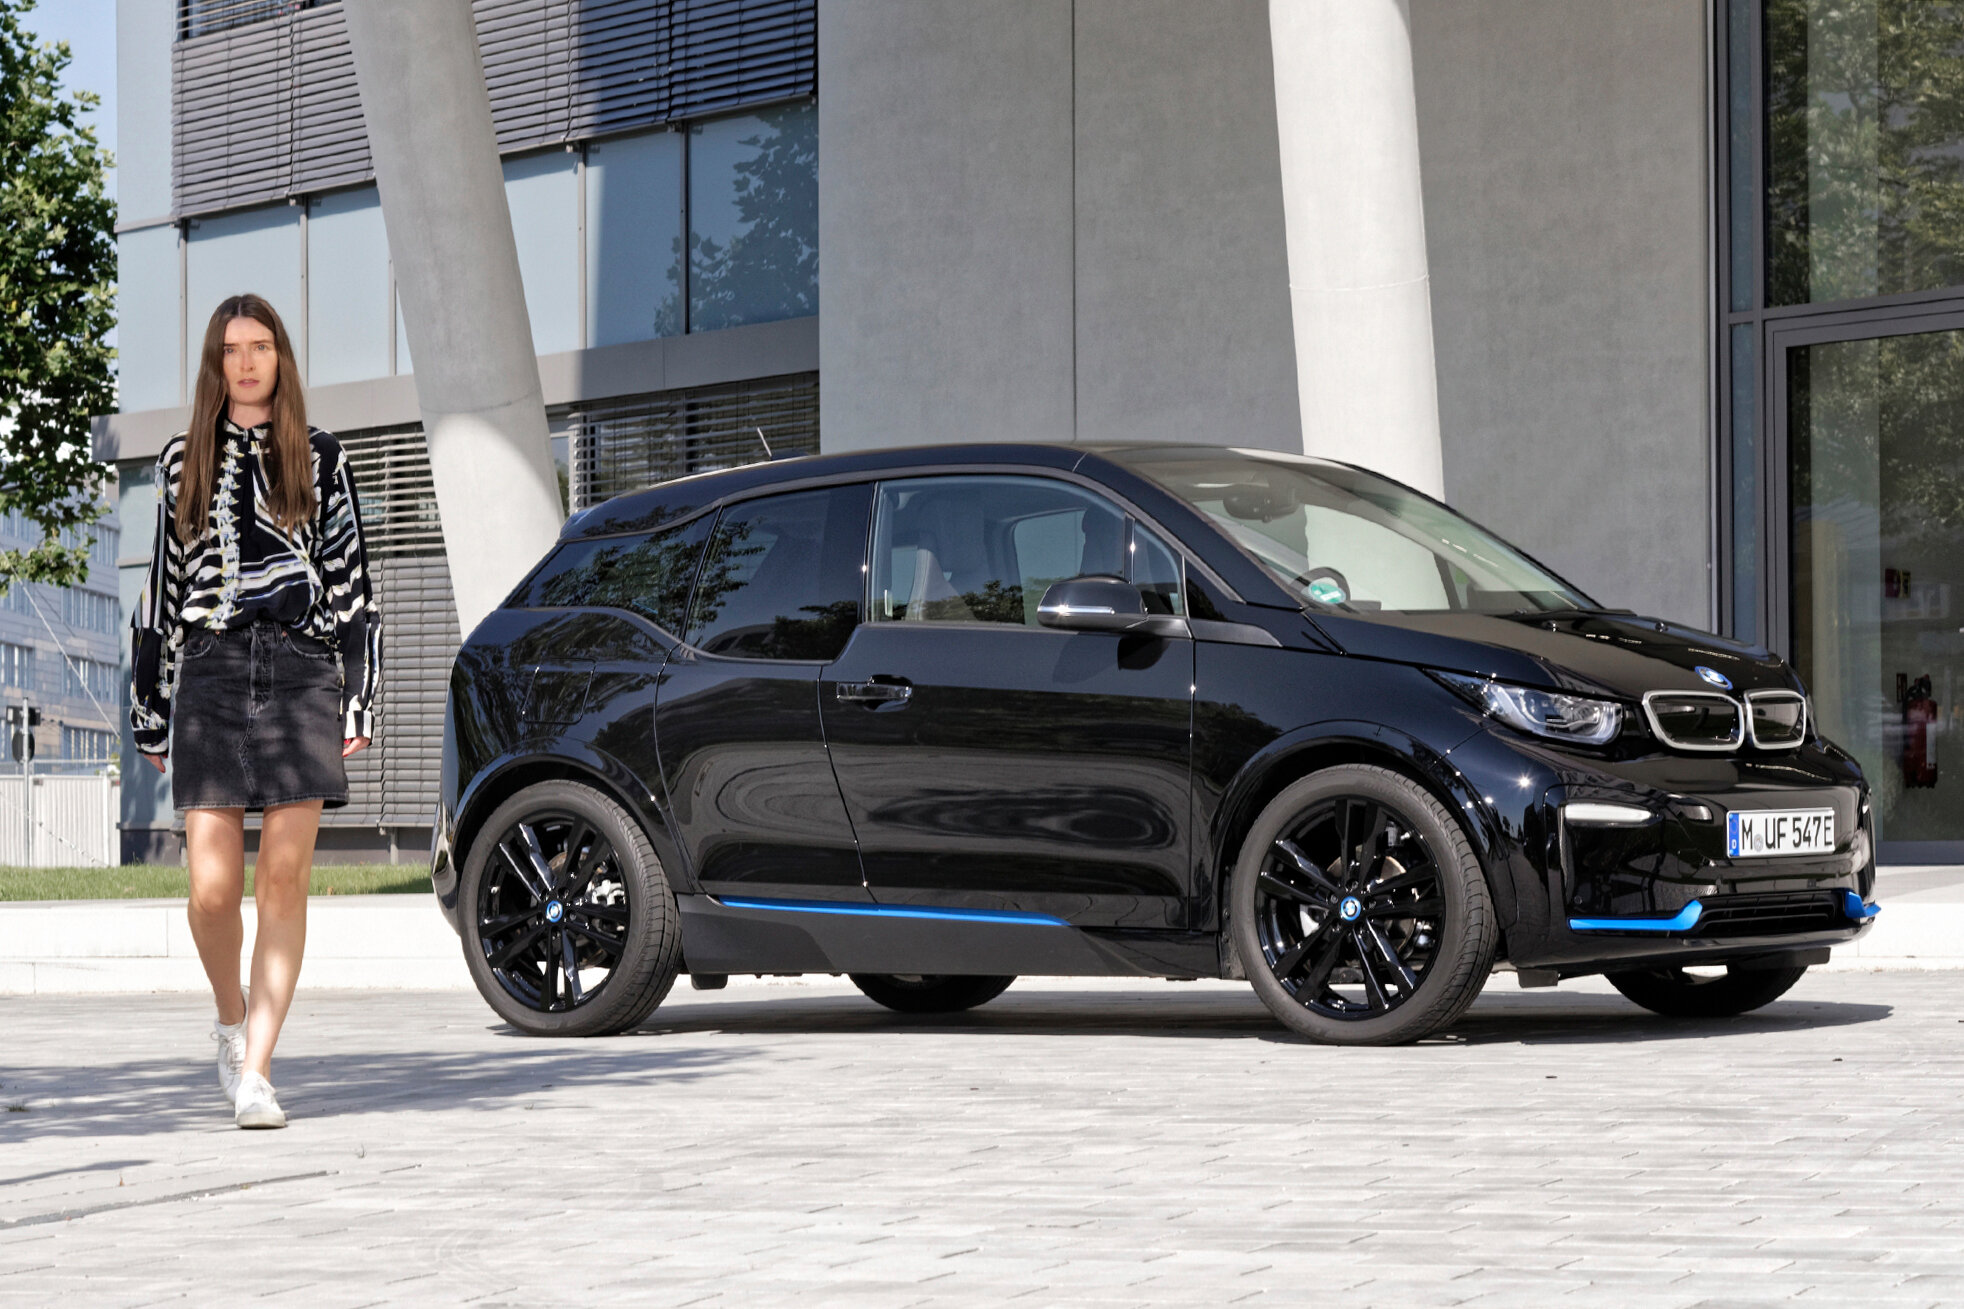 ellectric — The BMW i3 – setting a trend for the future of urban mobility